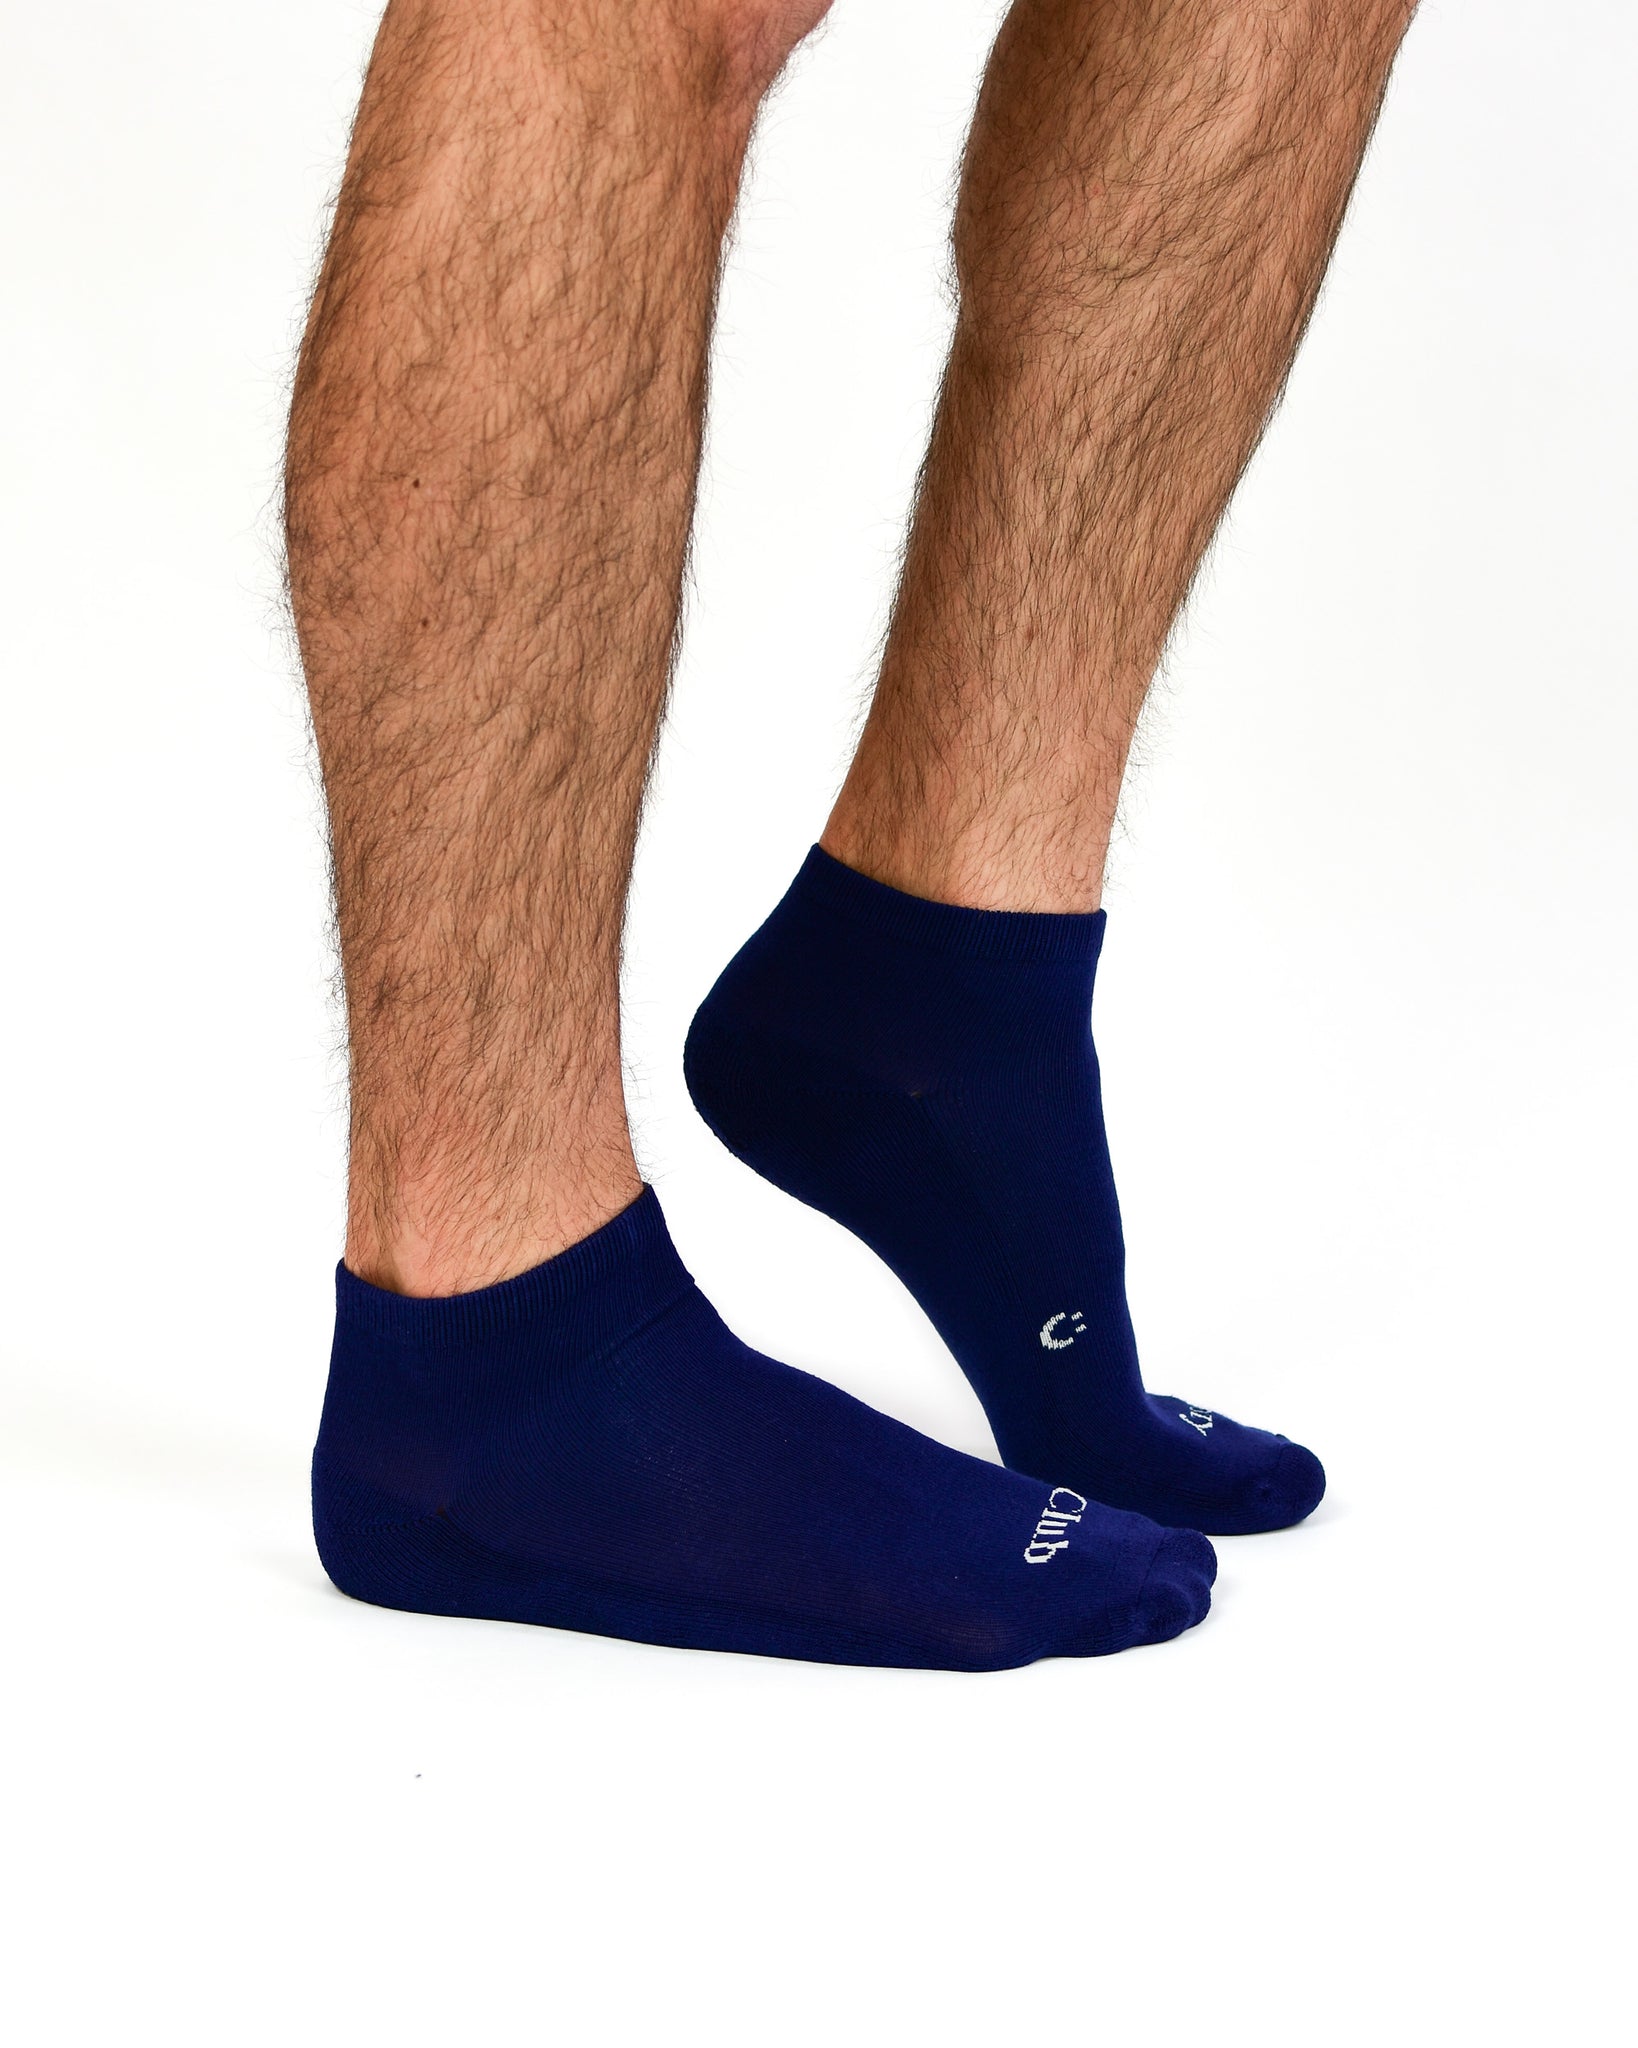 Everyday Ankle Seamless Feel Sock 4 Pack (Adults) - Multi